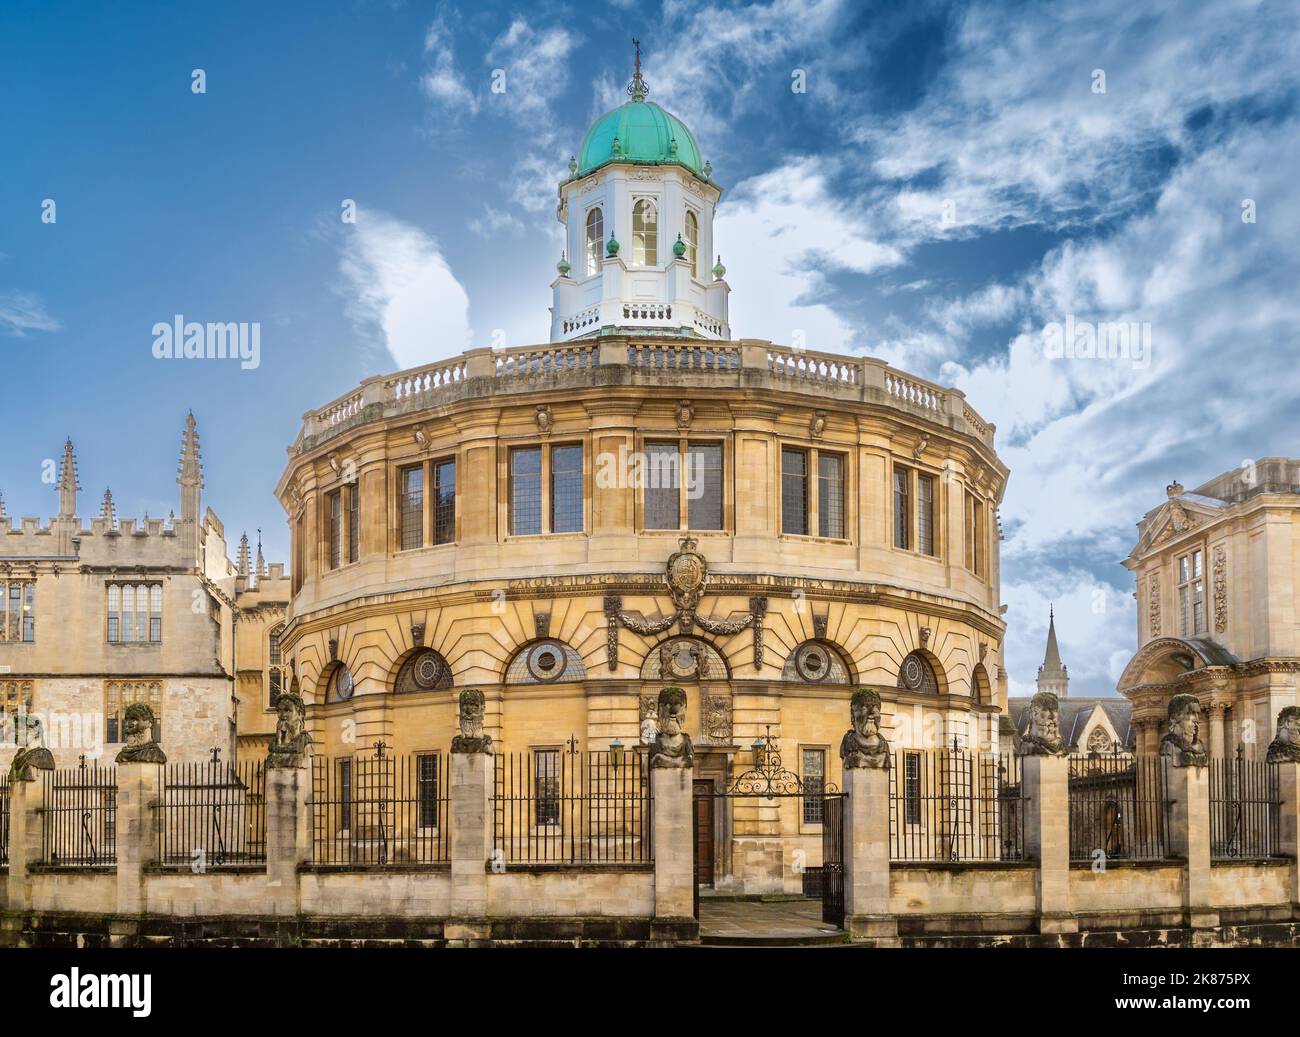 Sheldonian Theatre, Oxford, Oxfordshire, Angleterre, Royaume-Uni, Europe Banque D'Images